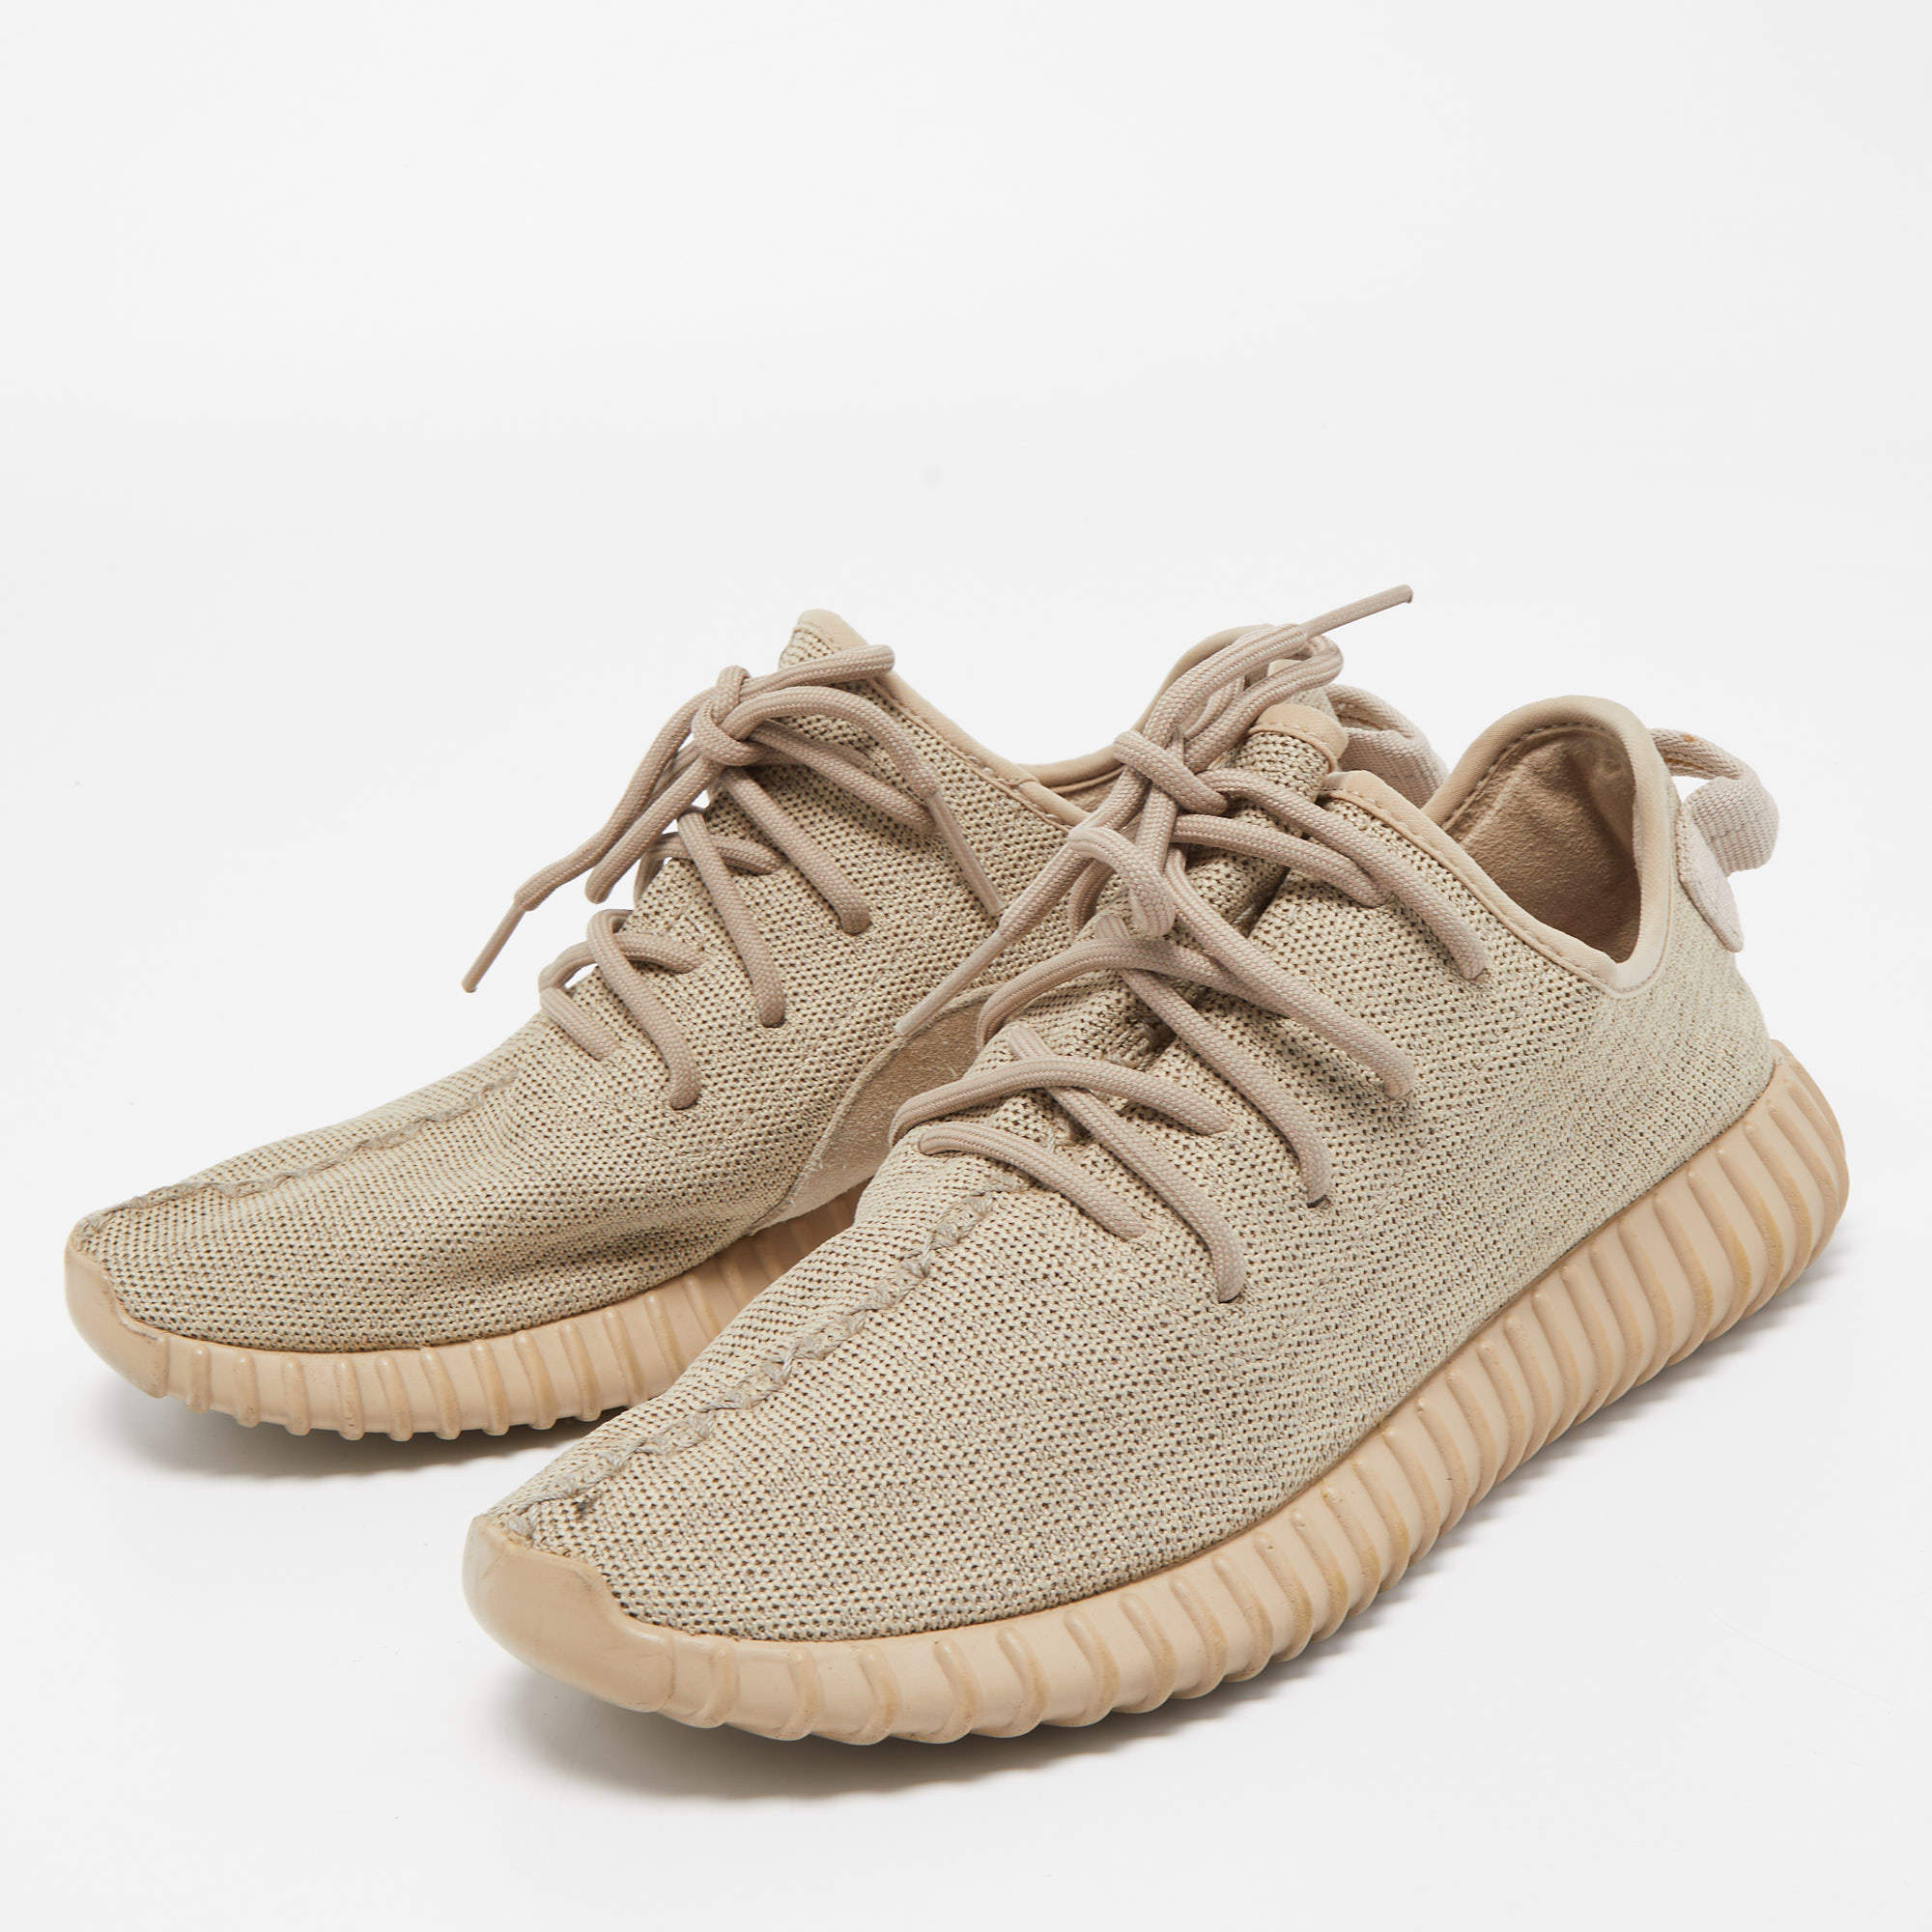 Undtagelse Hjemløs Estate Yeezy x Adidas Brown Suede Boost 350 V2 Oxford Tan Sneakers Size 42 Yeezy x  Adidas | TLC